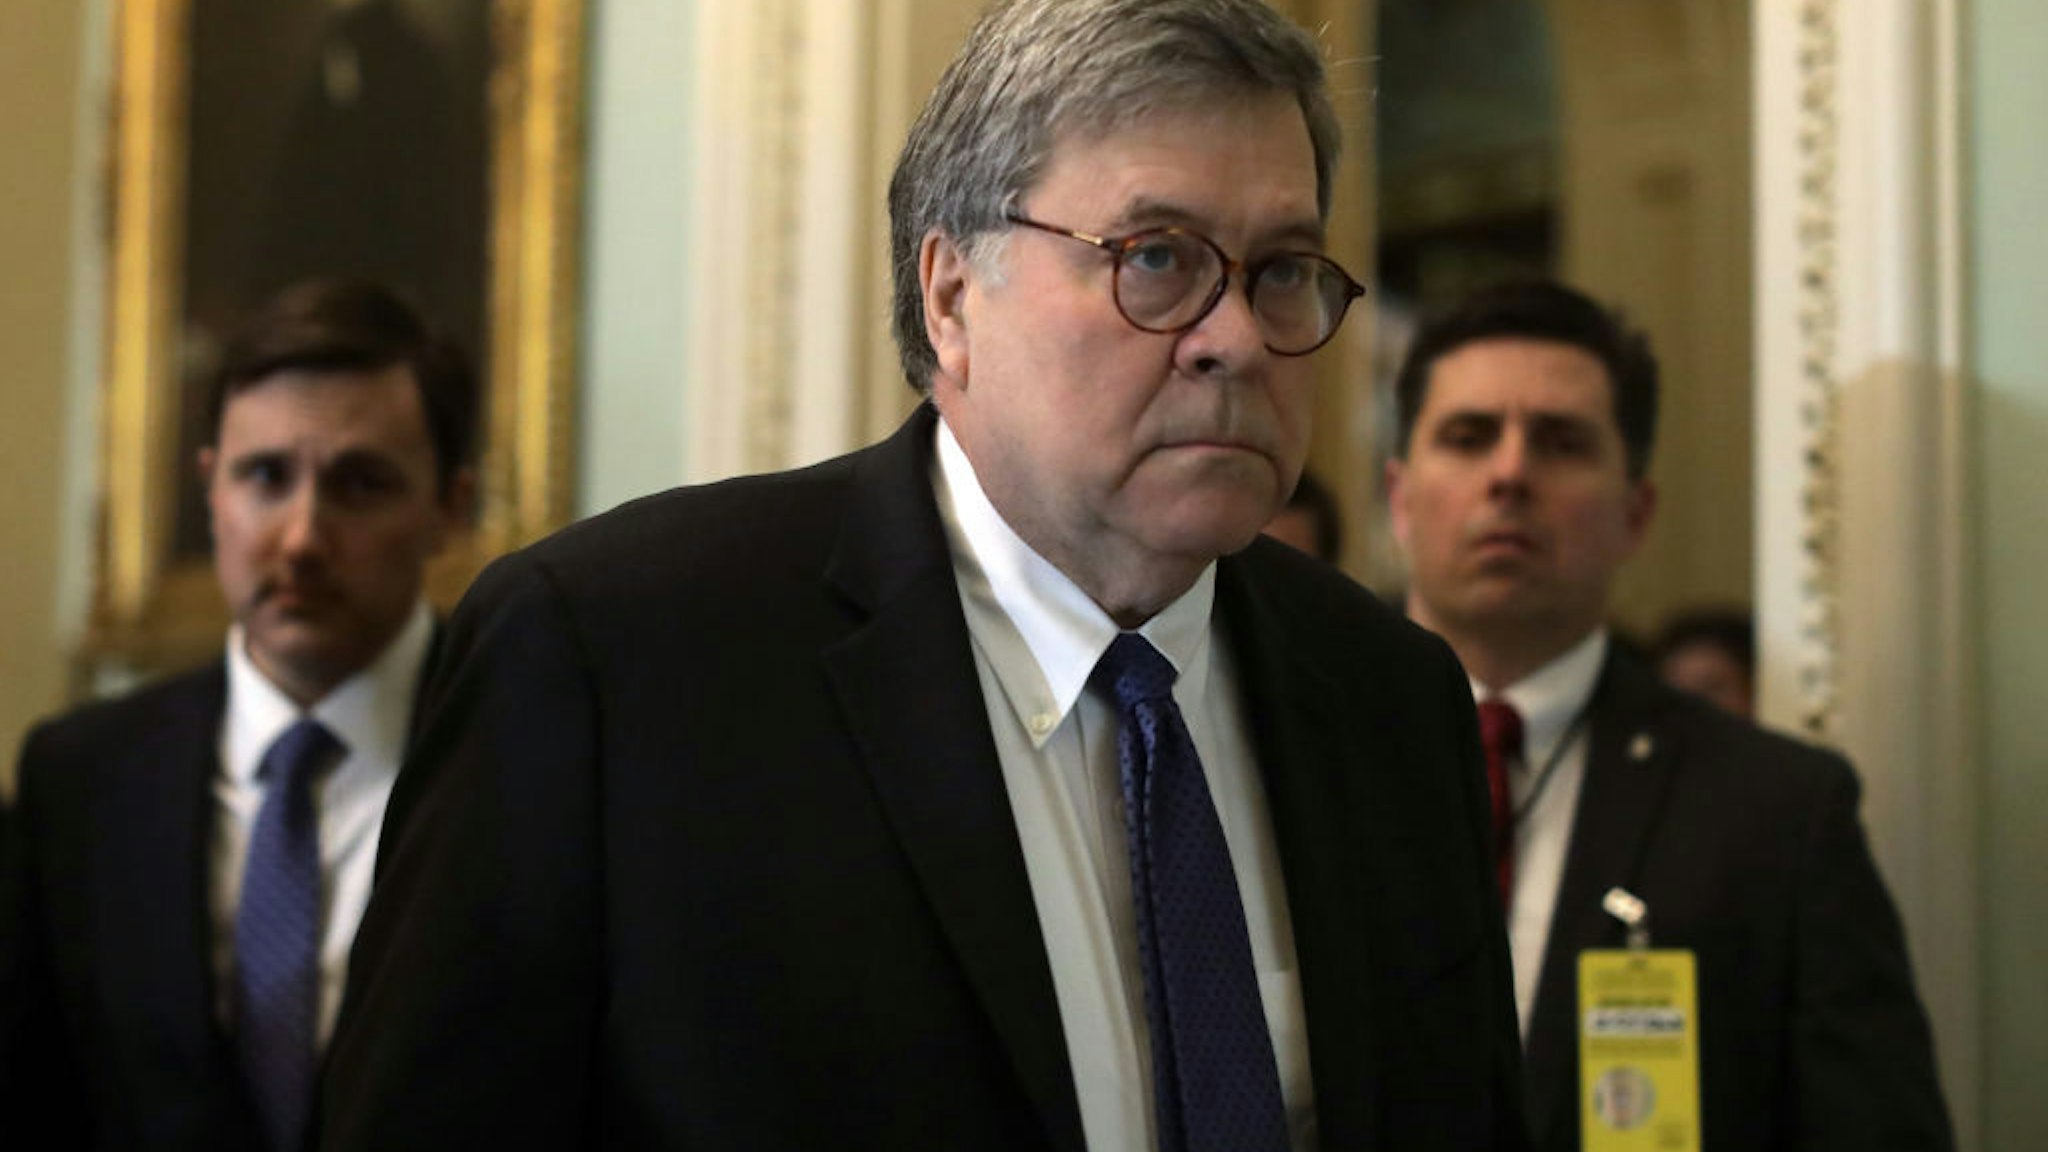 WASHINGTON, DC - FEBRUARY 25: U.S. Attorney General William Barr walks through a hallway at the U.S. Capitol February 25, 2020 in Washington, DC. Barr is on Capitol Hill to attend the weekly Senate Republican policy luncheon. (Photo by Alex Wong/Getty Images)